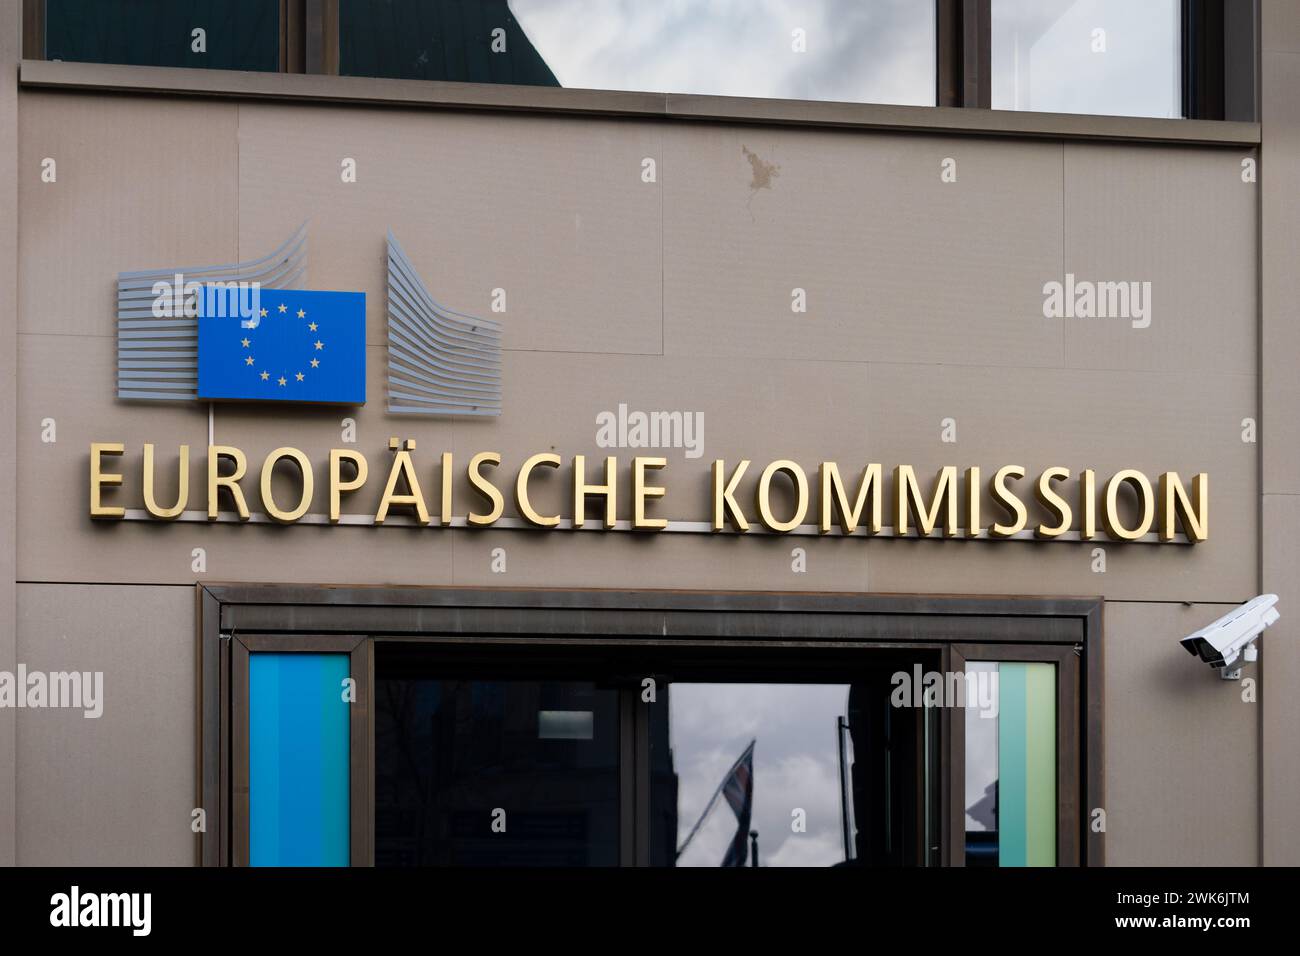 Europäische Kommission (European Commission) sign on a house facade. Golden letters on the exterior wall of a EU governmental office buidling. Stock Photo